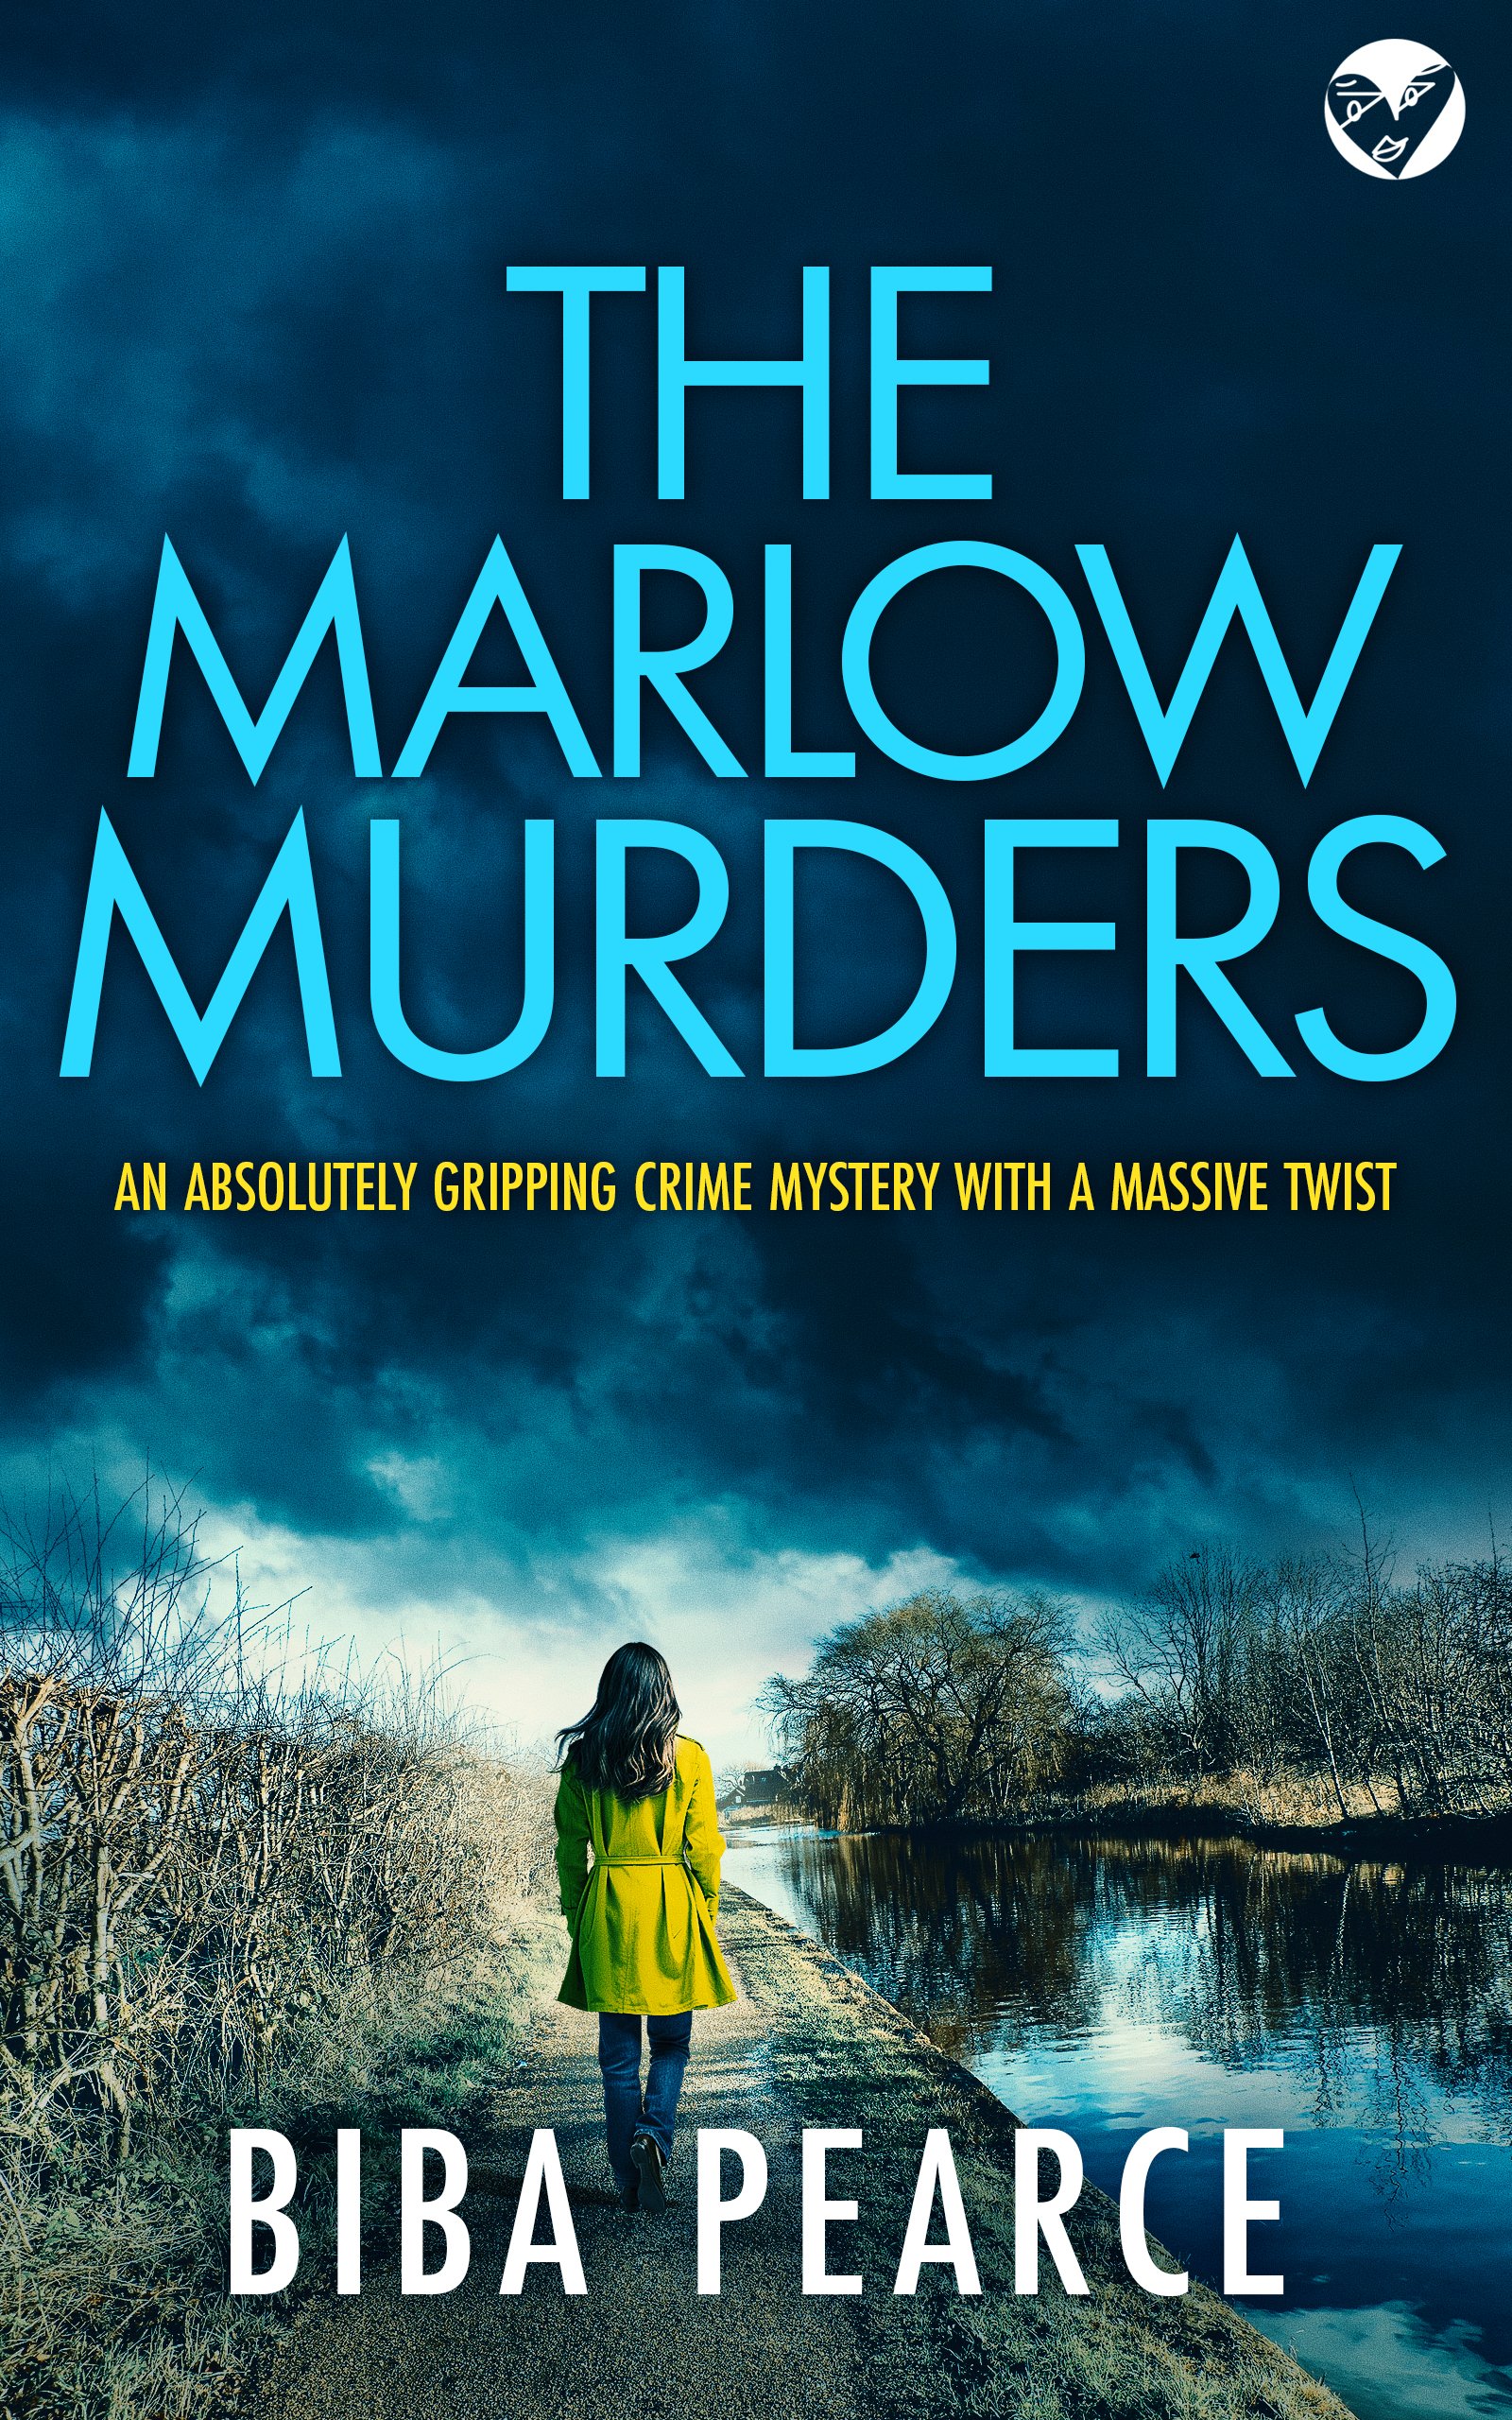 THE MARLOW MURDERS publish cover.jpg